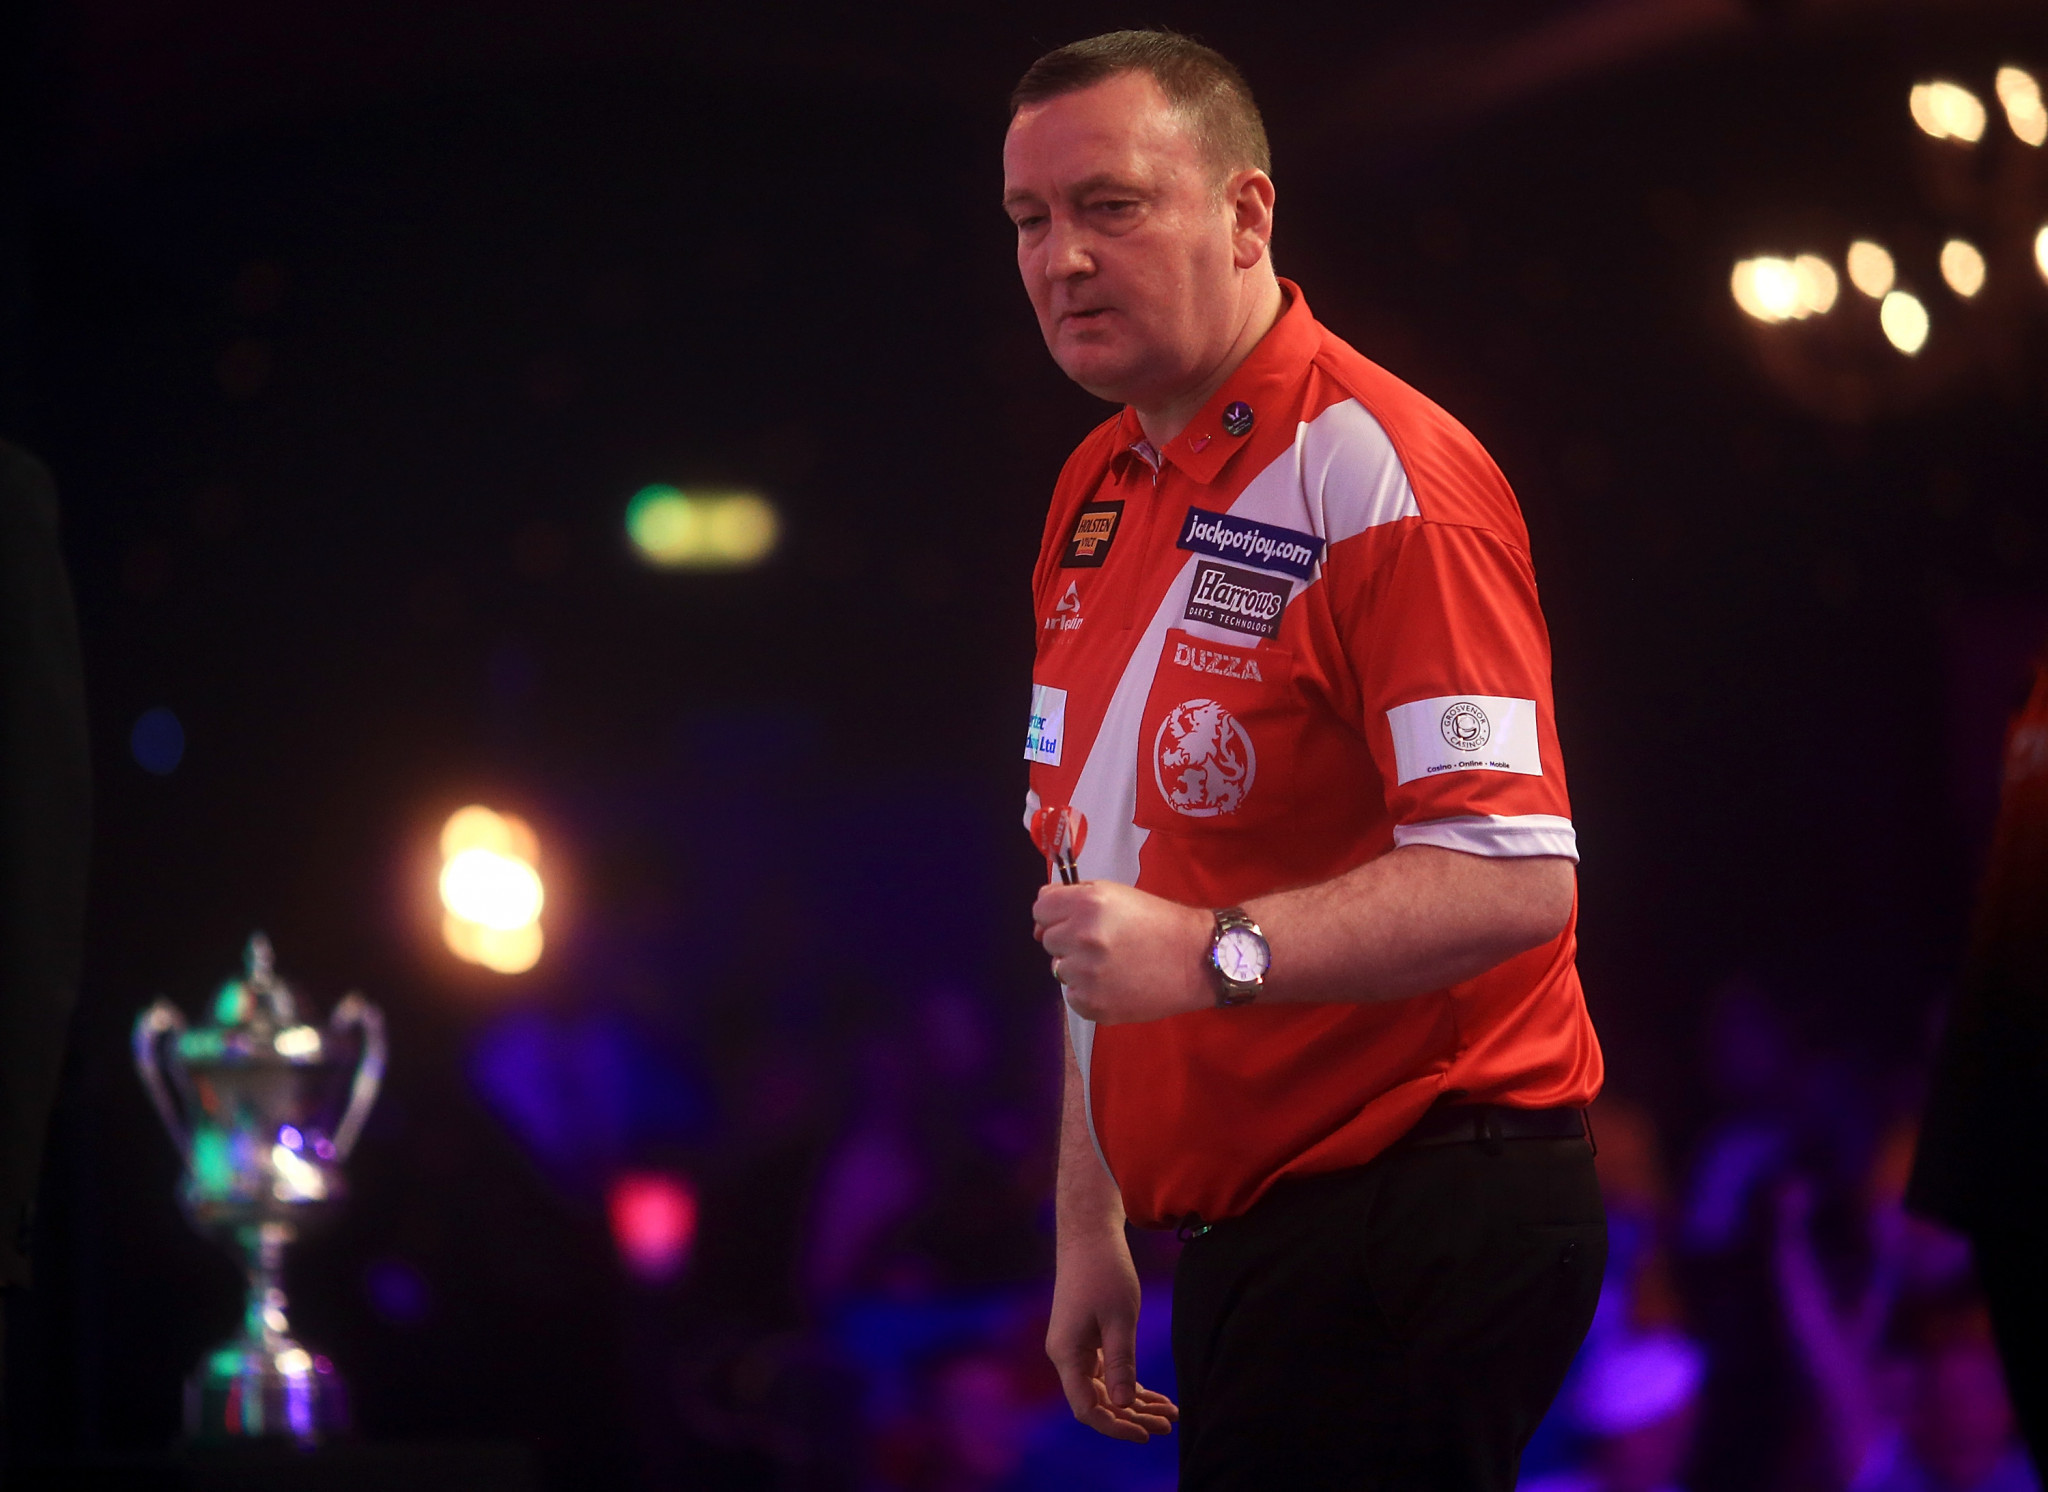 Glen Durrant began his title defence with a routine victory ©Getty Images 